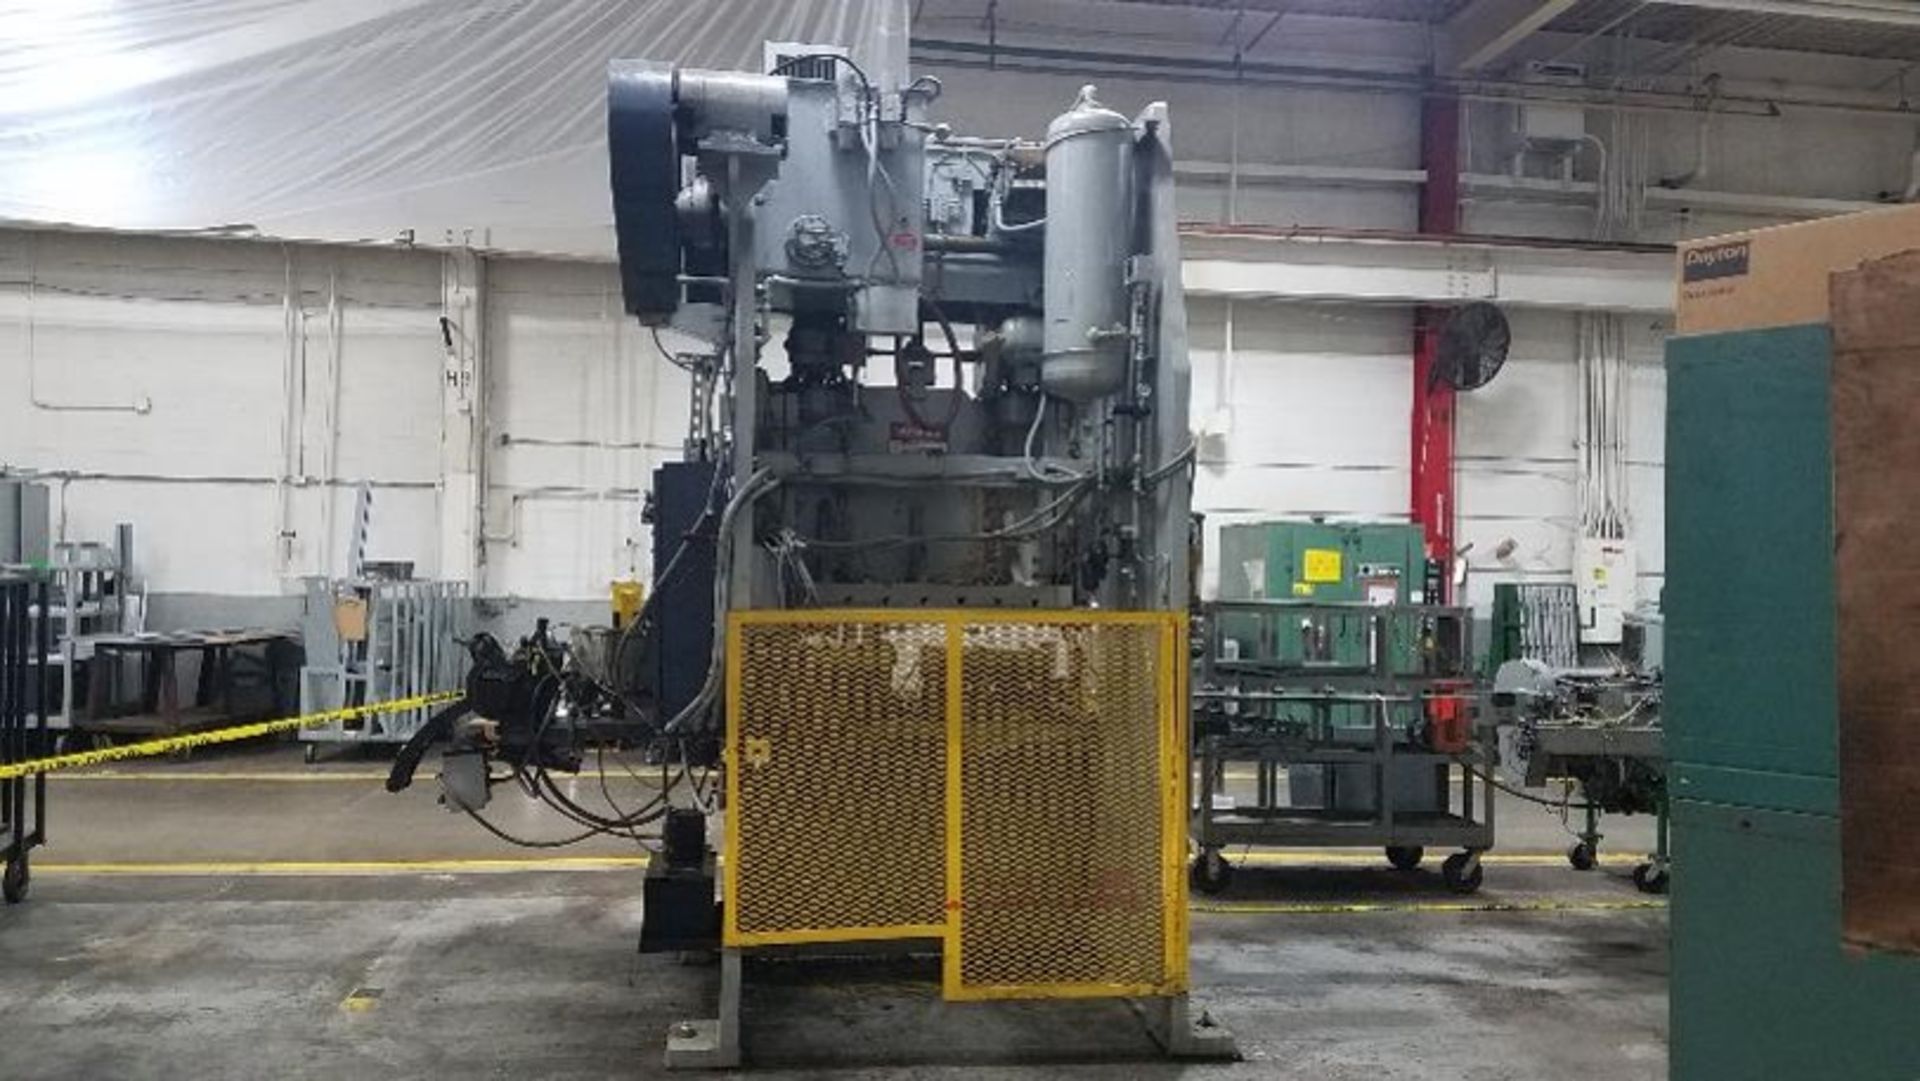 VERSON 100 TON PRESS MODEL-100-0P2-46 S#22915 STROKE-6 SHUT HEIGHT-15 STROKE/MINUTES 35 (Located at: - Image 4 of 5